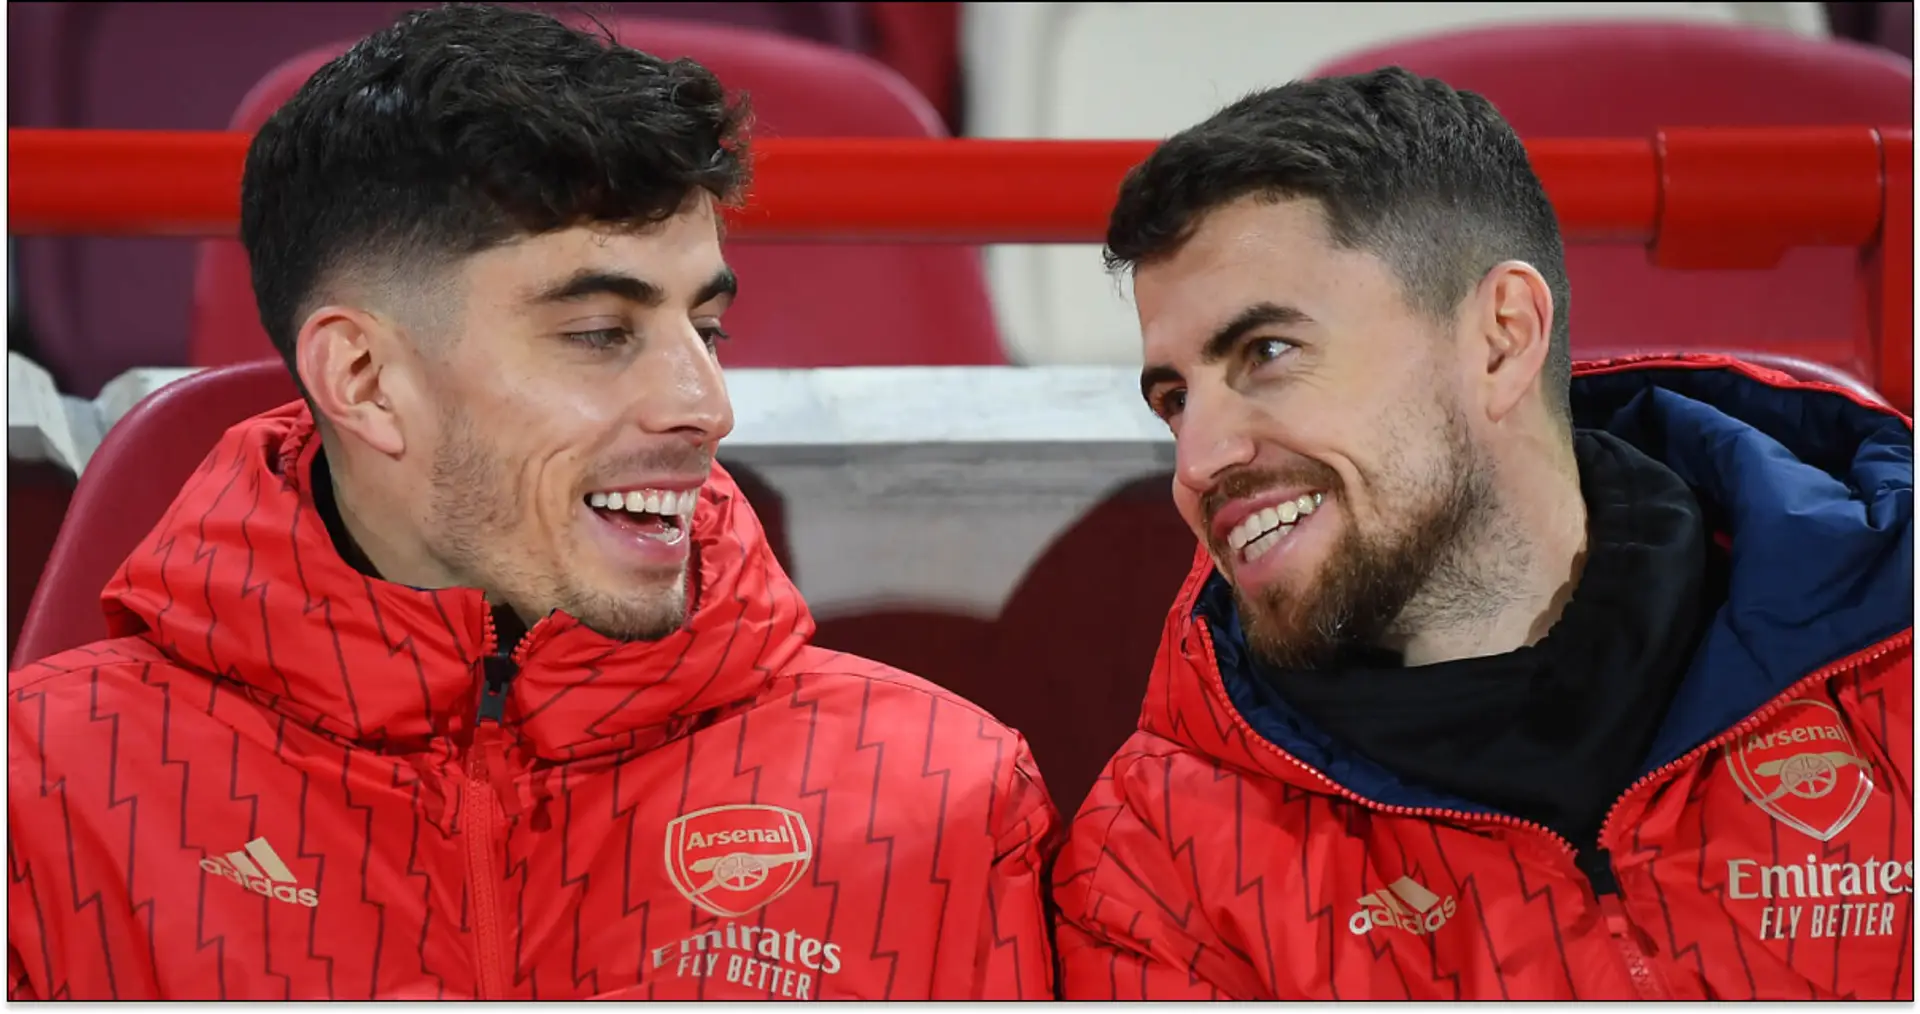 Jorginho explains how he helped Havertz deal with criticism in first months of Kai's Arsenal career